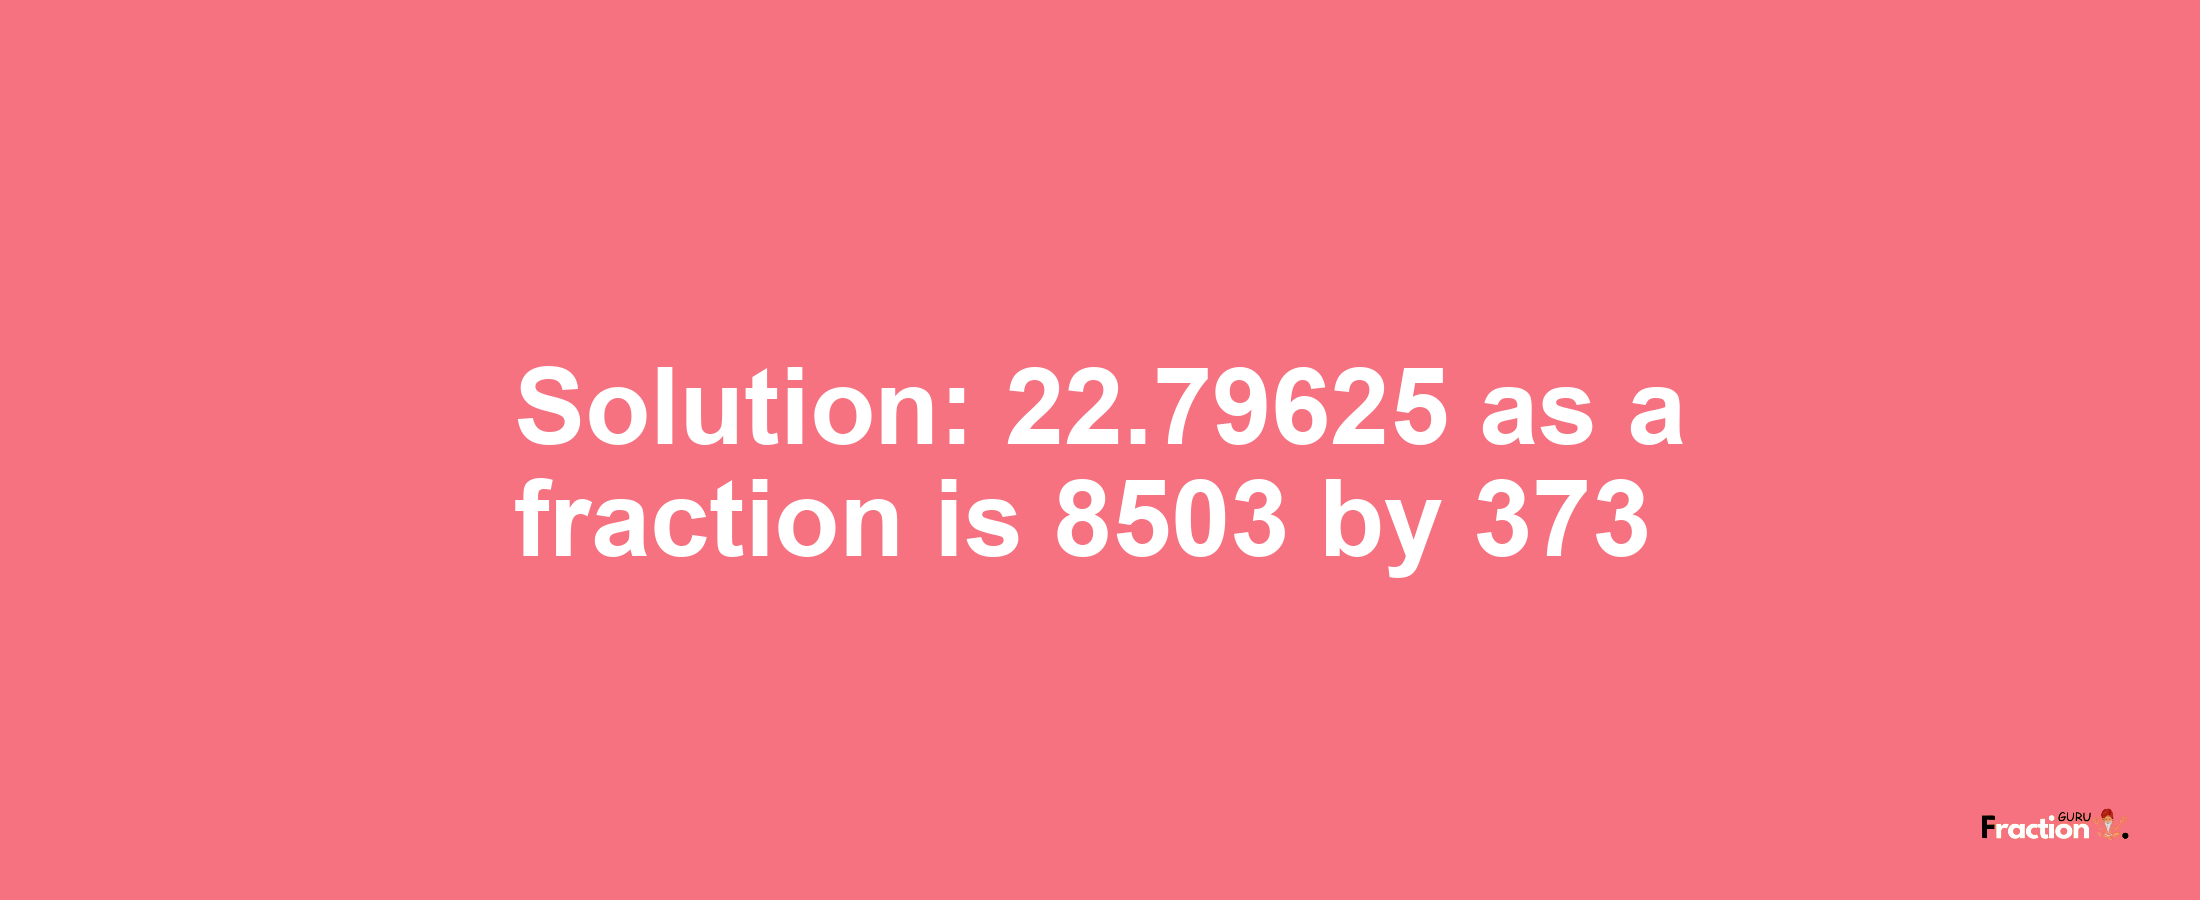 Solution:22.79625 as a fraction is 8503/373